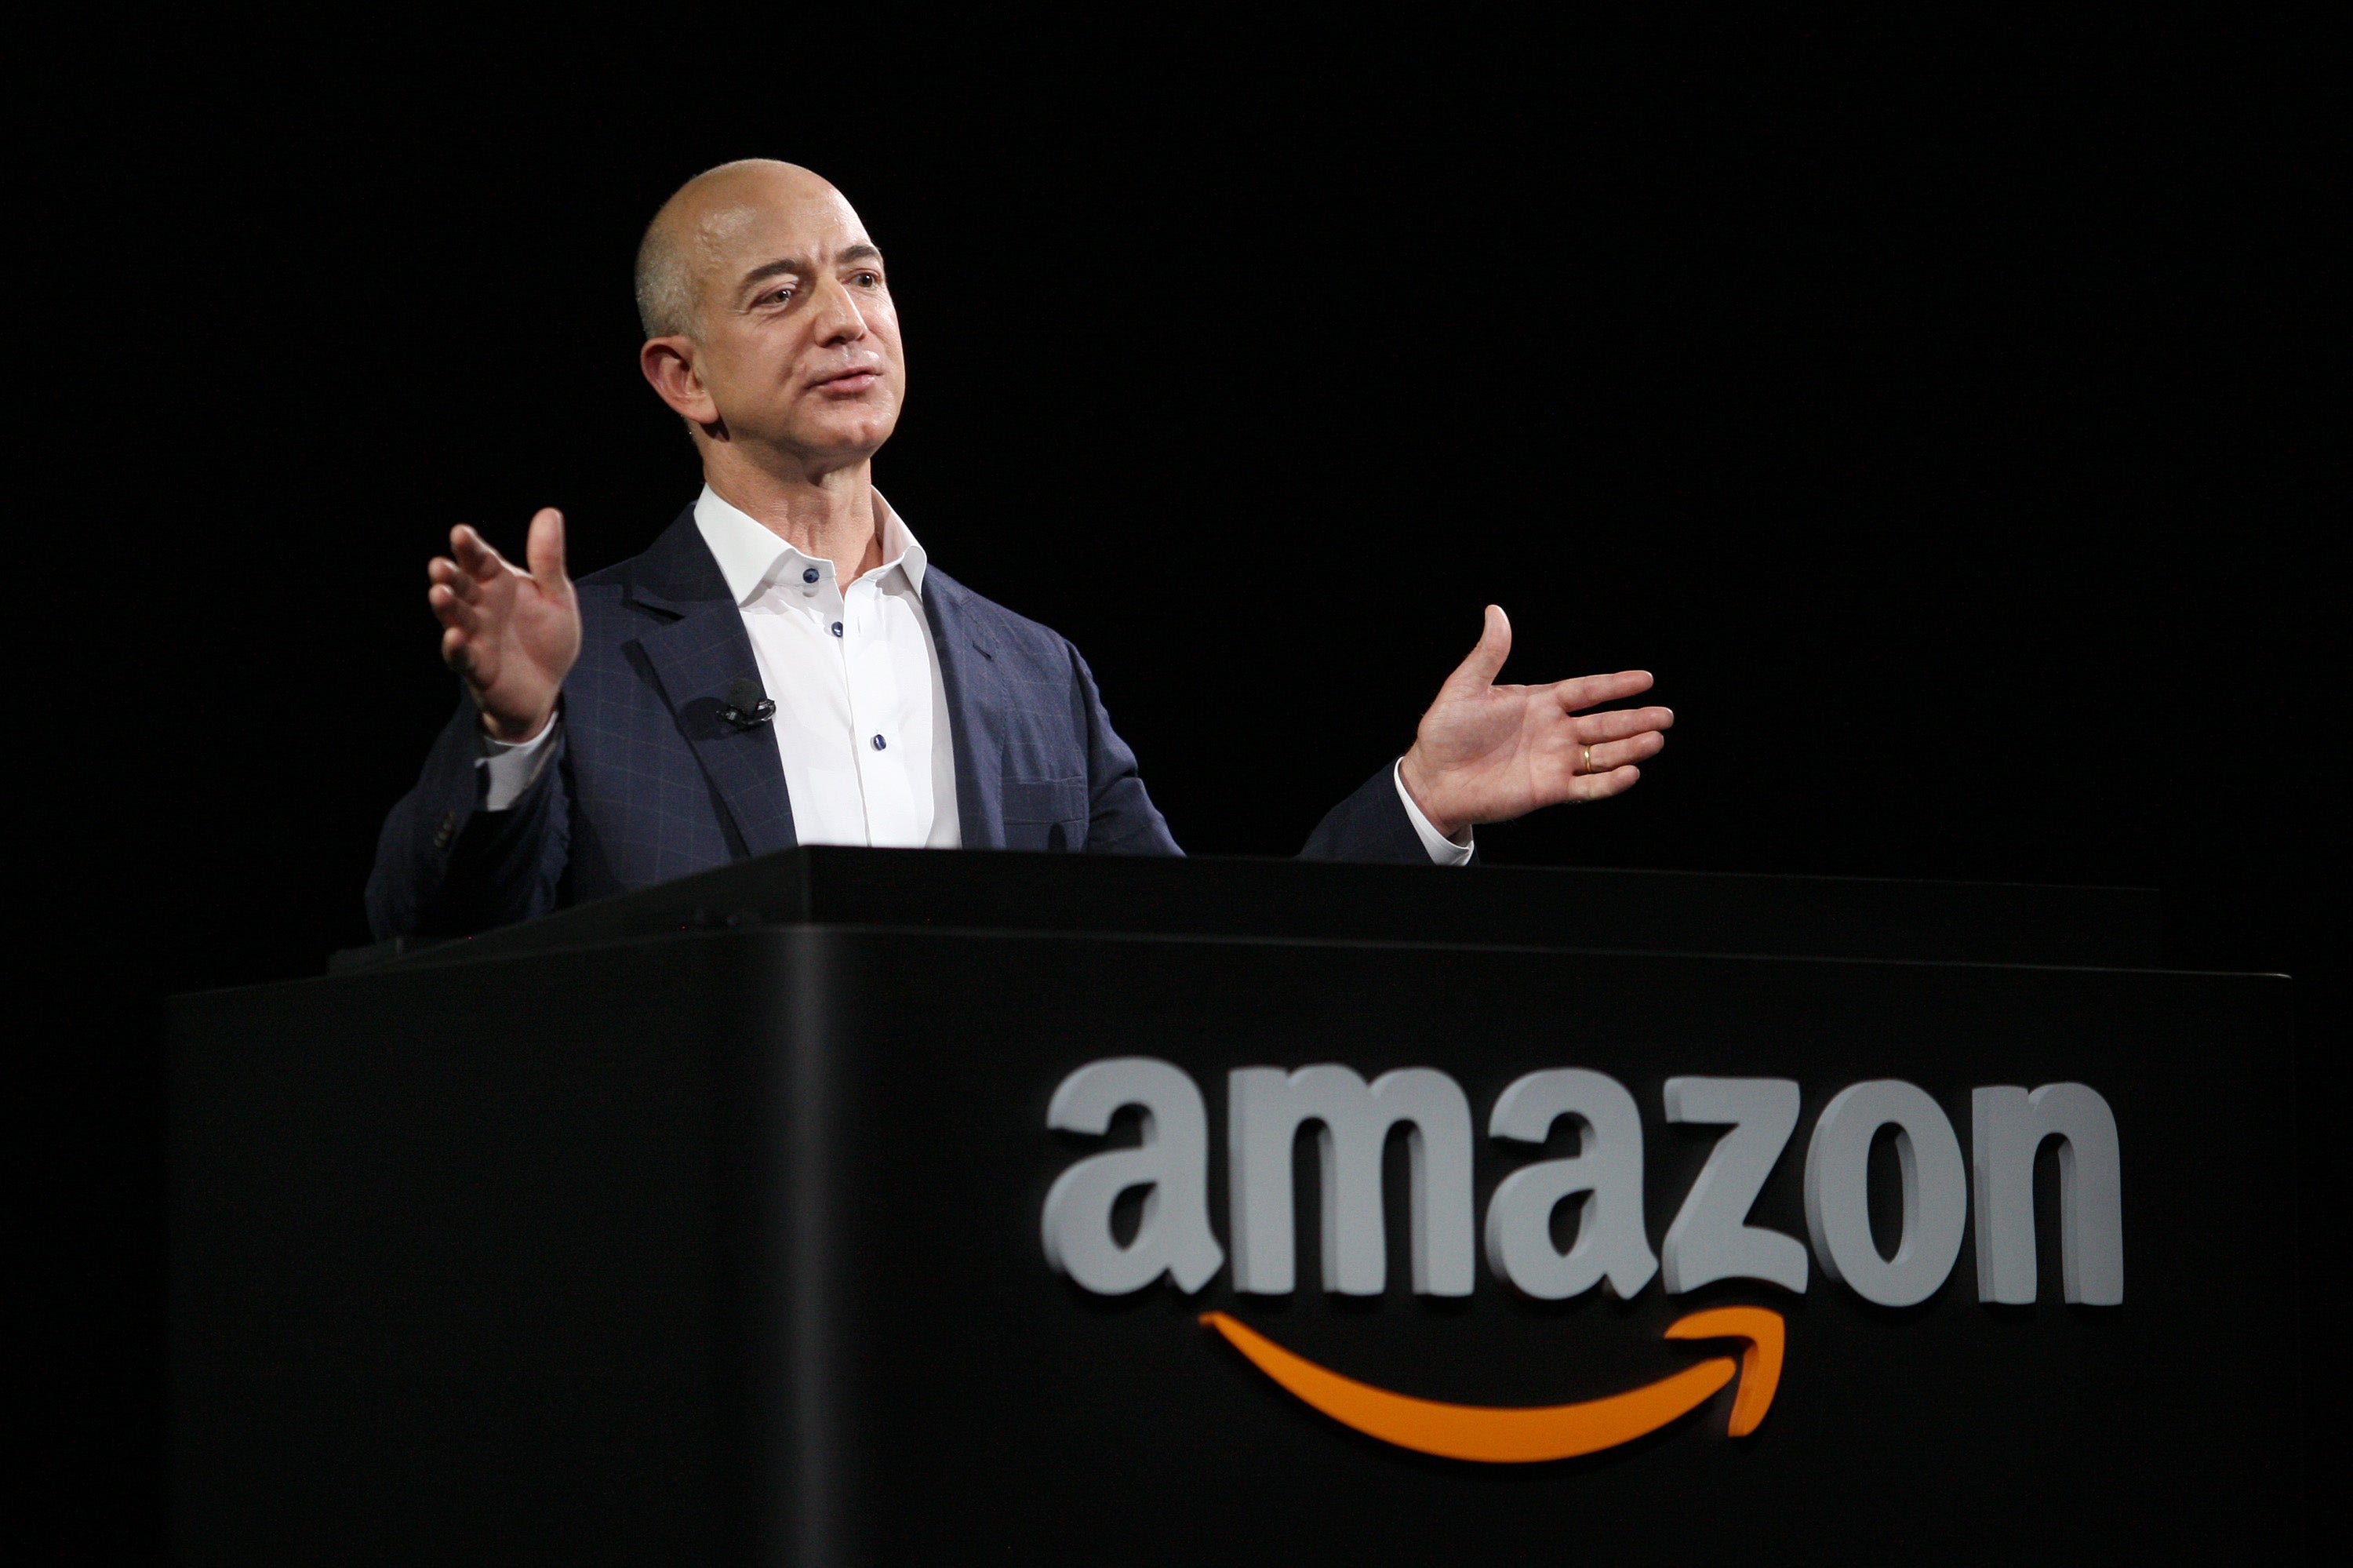 'This executive order is one we do not supoprt,' Amazon CEO Jeff Bezos says